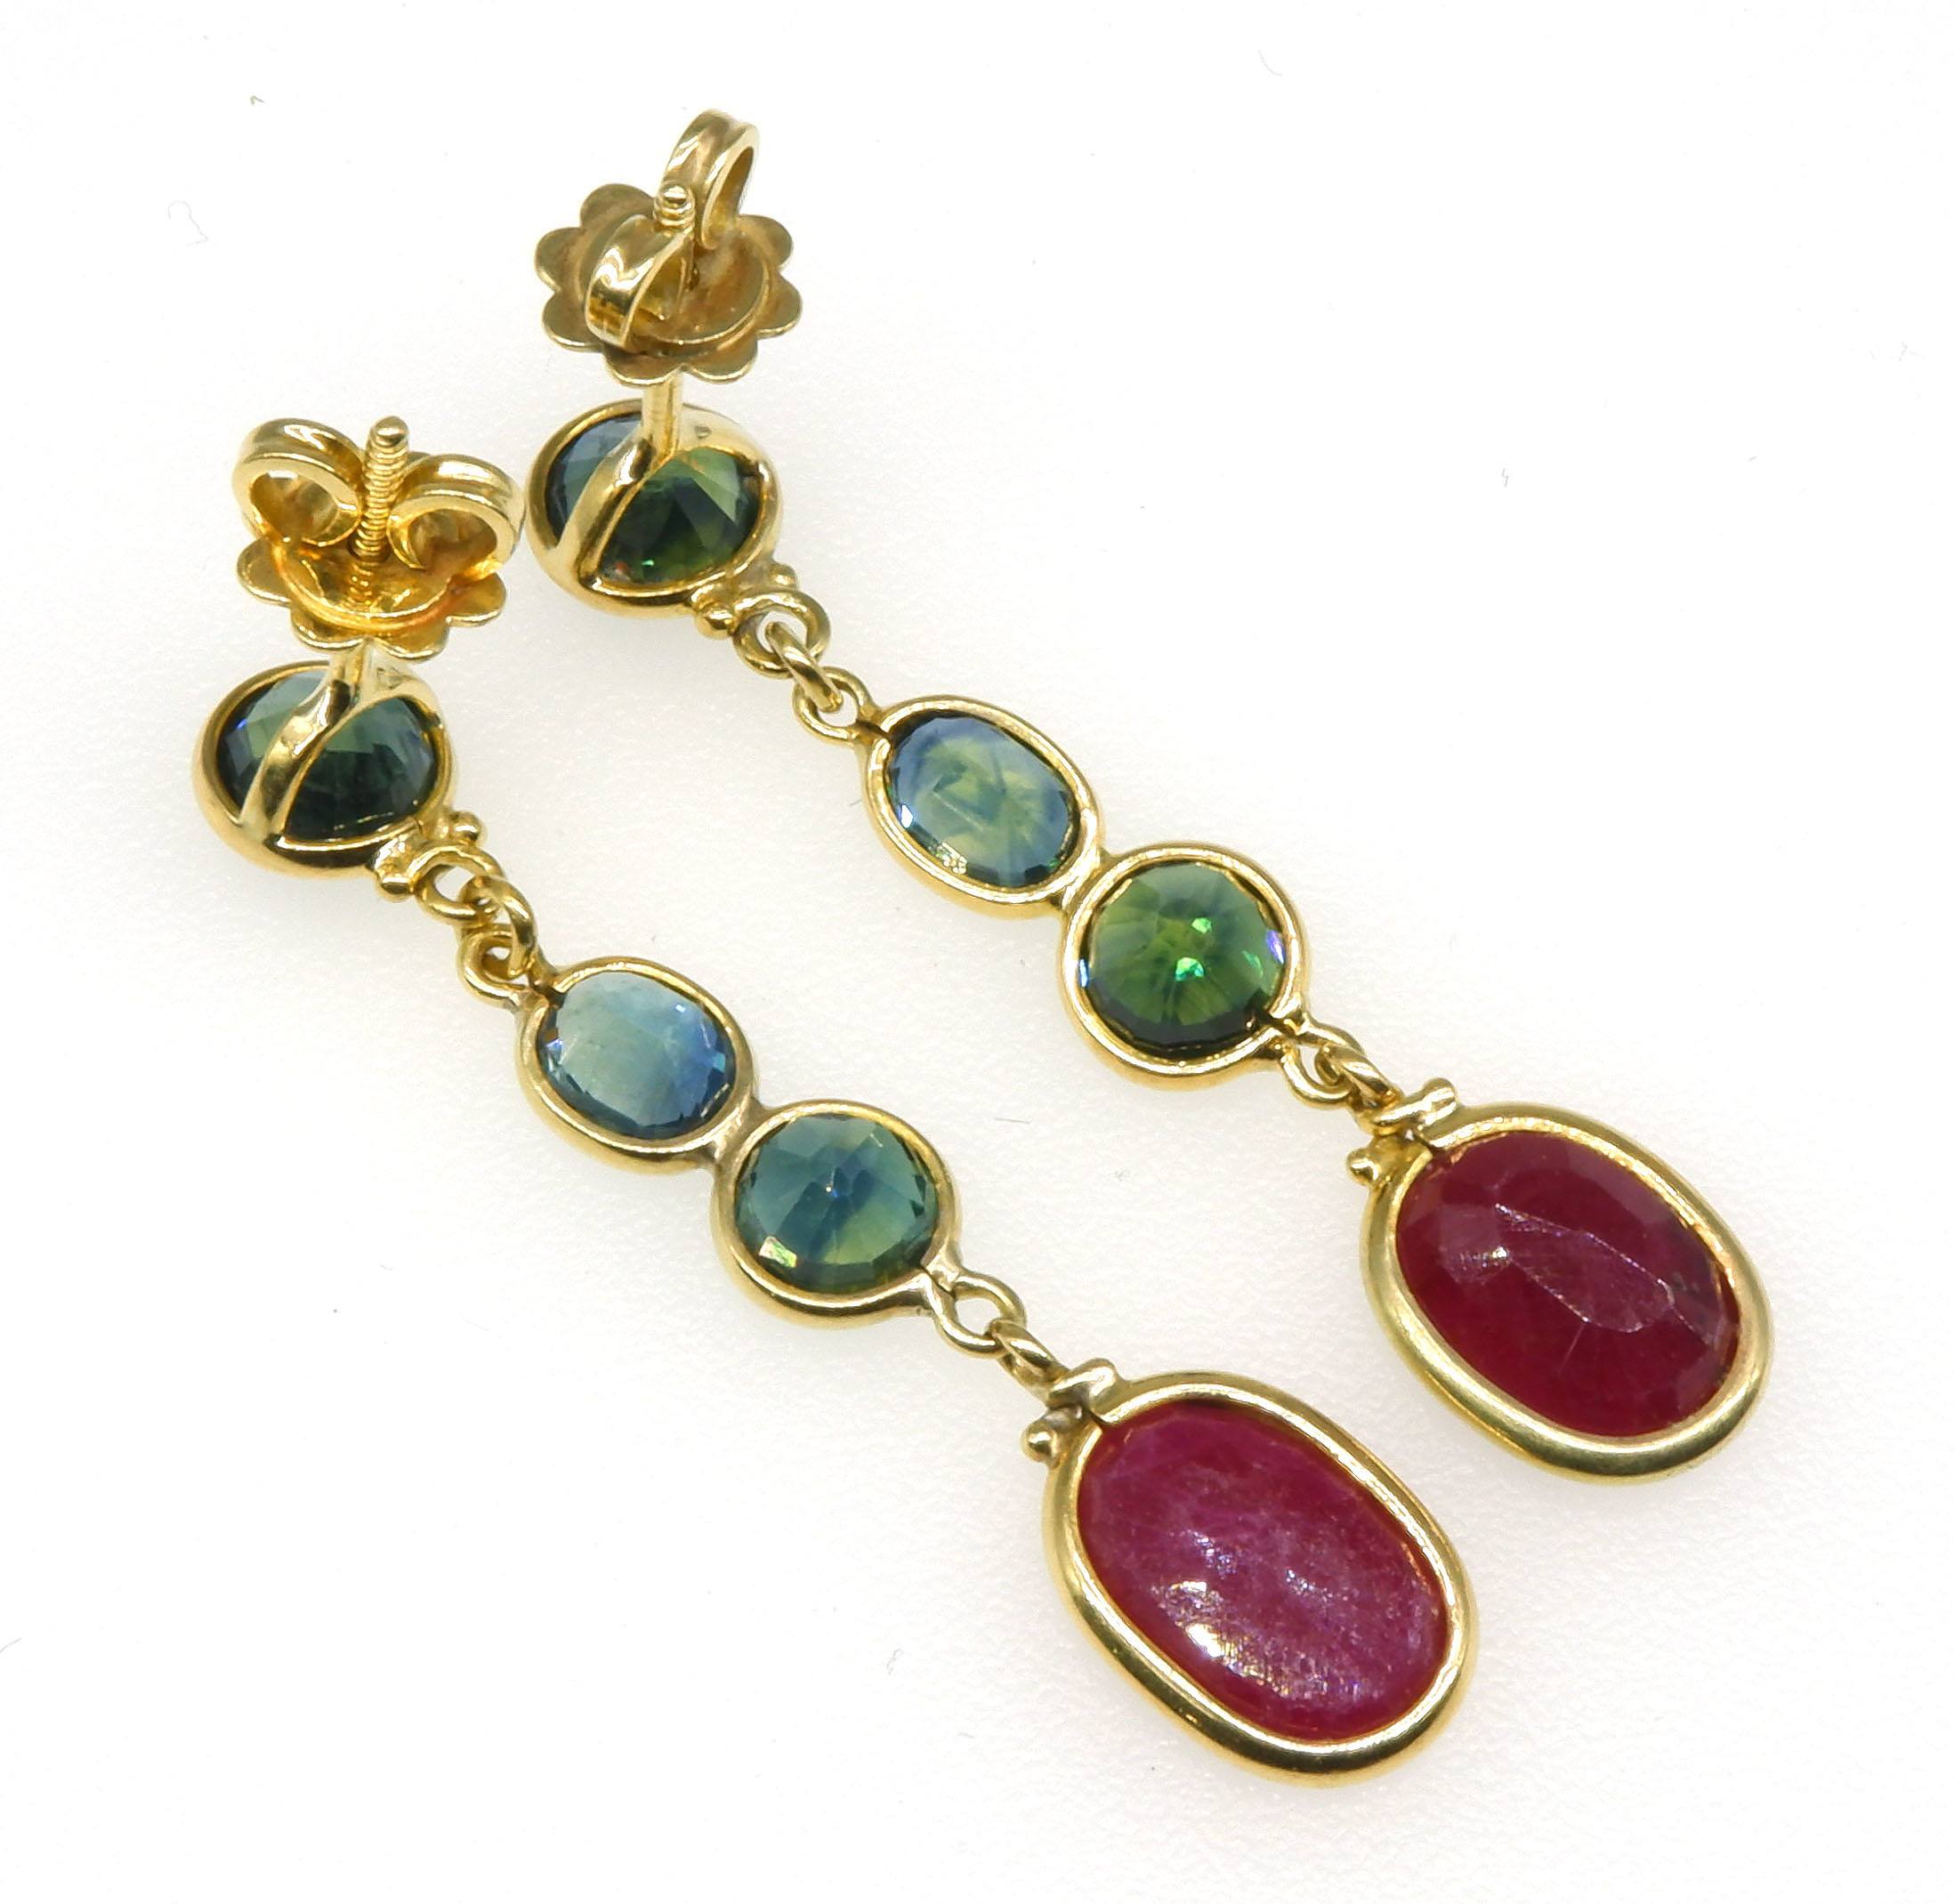 '18ct Yellow Gold Australian Blue/Green Parti Sapphire and Ruby Drop Earrings'